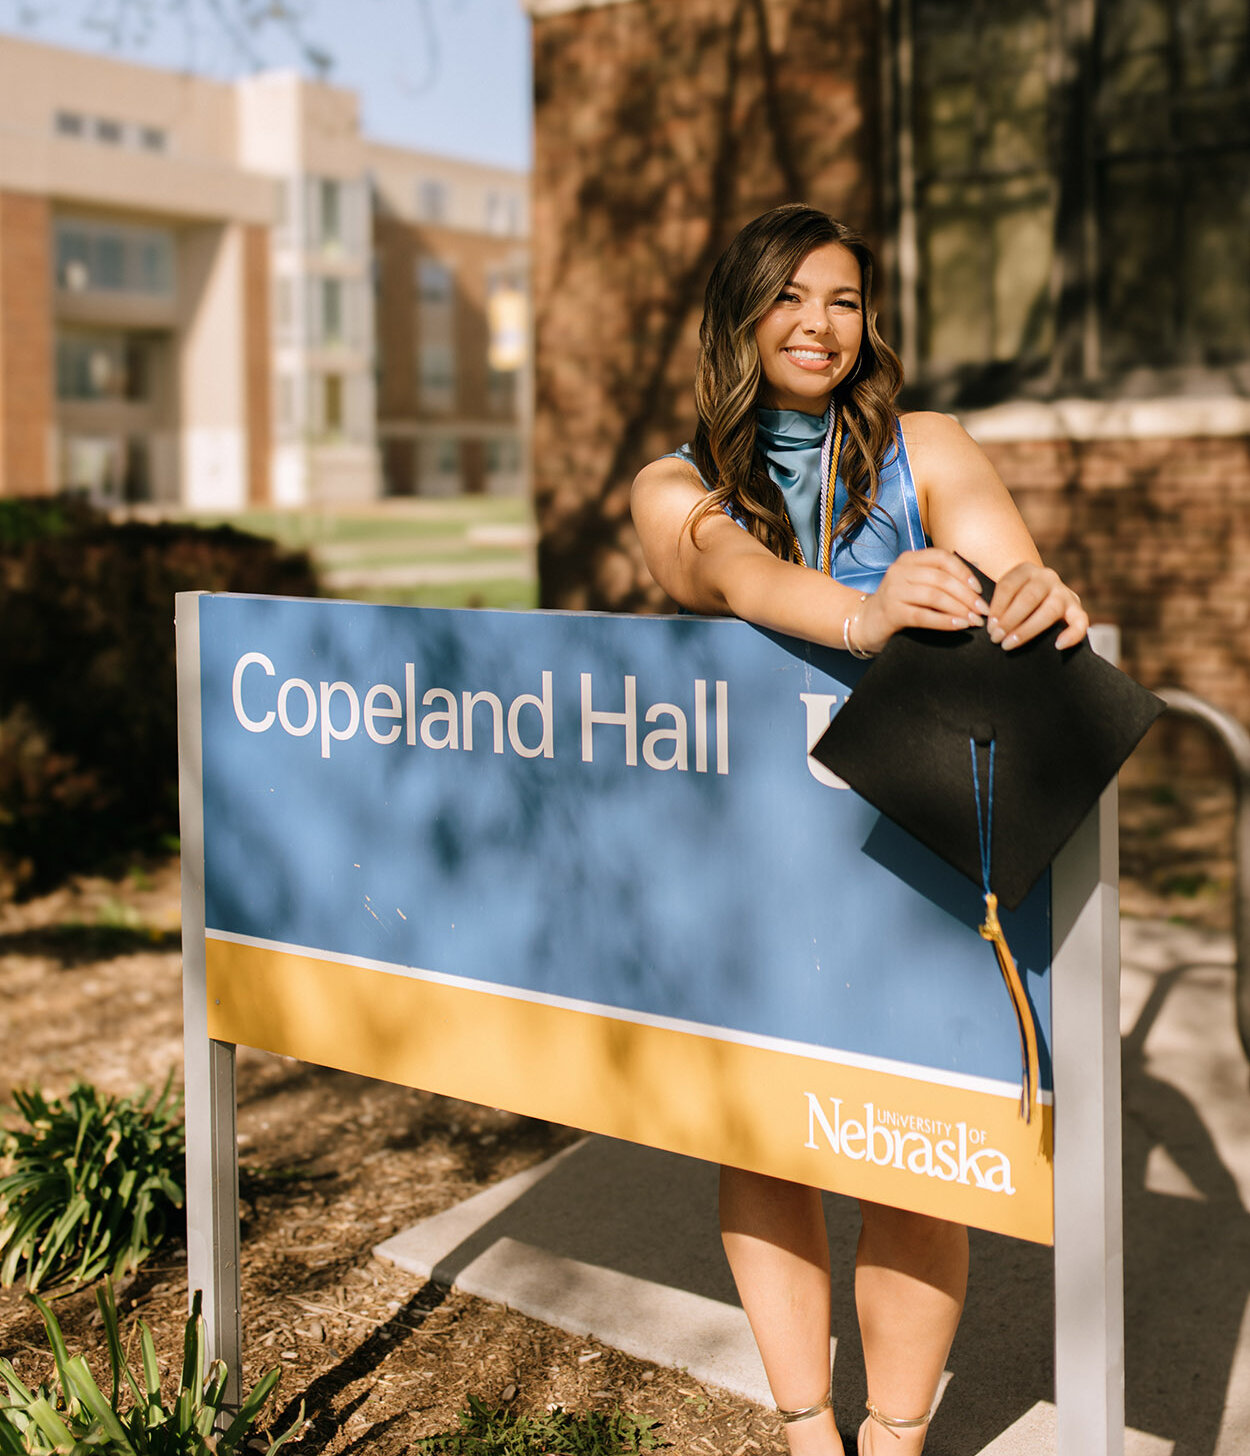 Katie Cornelio graduates from UNK on Friday with a bachelor’s degree in social science education. She was also selected to speak at the commencement ceremony. (Cheyanne M. Photography)